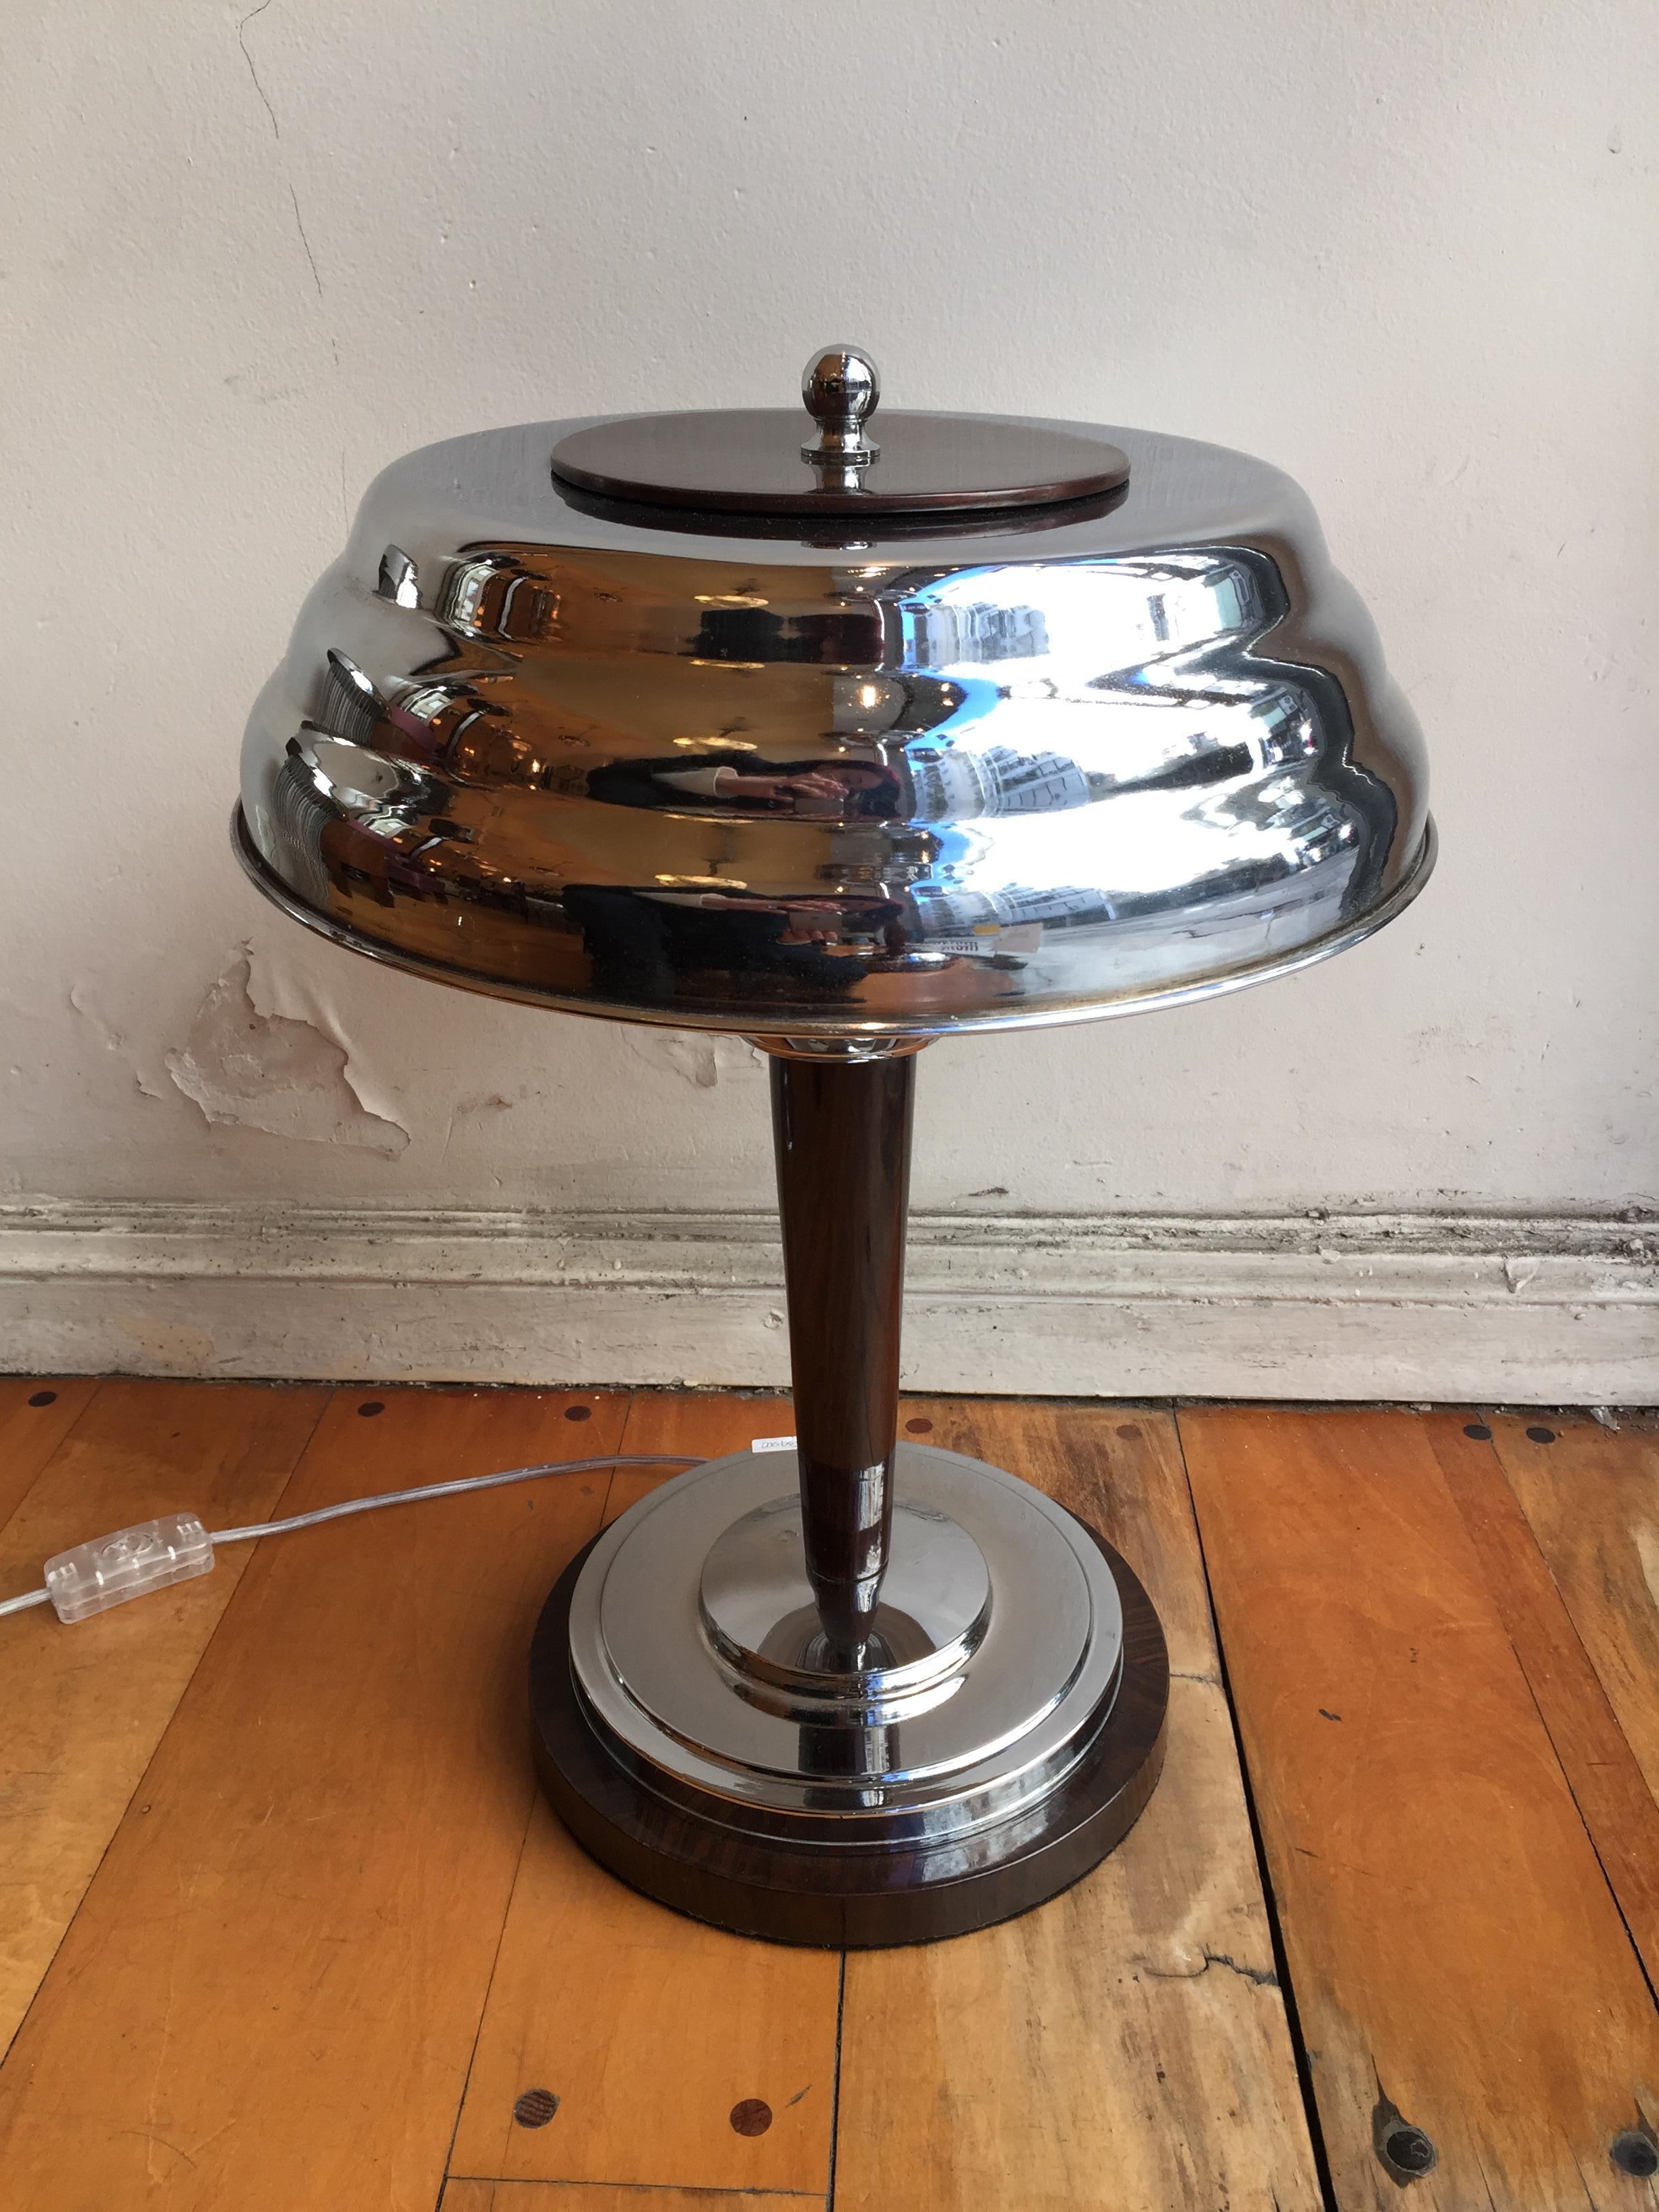 2 tables lamps Art deco

Material: wood and Chrome 
Style: Art Deco
Country: France
To take care of your property and the lives of our customers, the new wiring has been done.
If you want to live in the golden years, this is the lighting that your